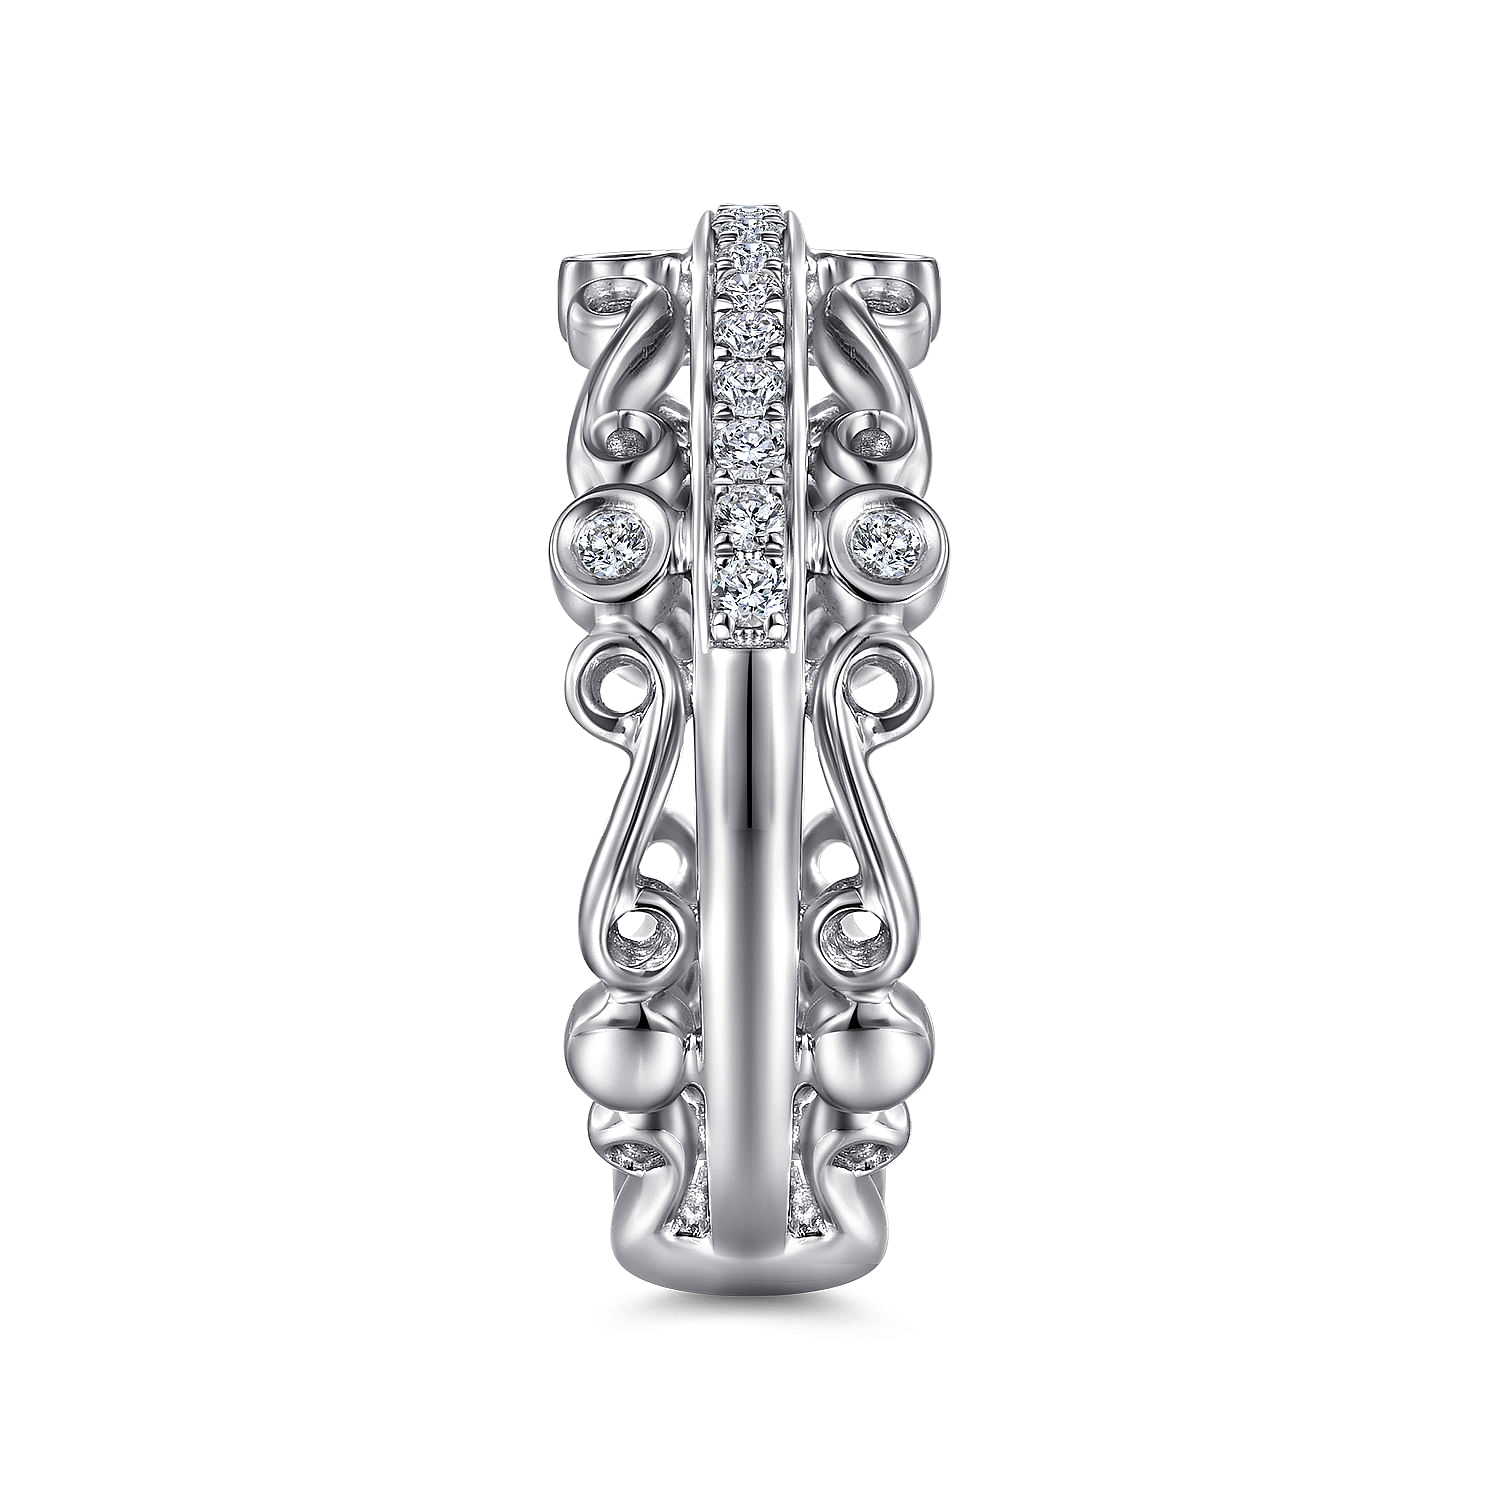 Wide 14K White Gold Diamond Anniversary Band with Scrollwork